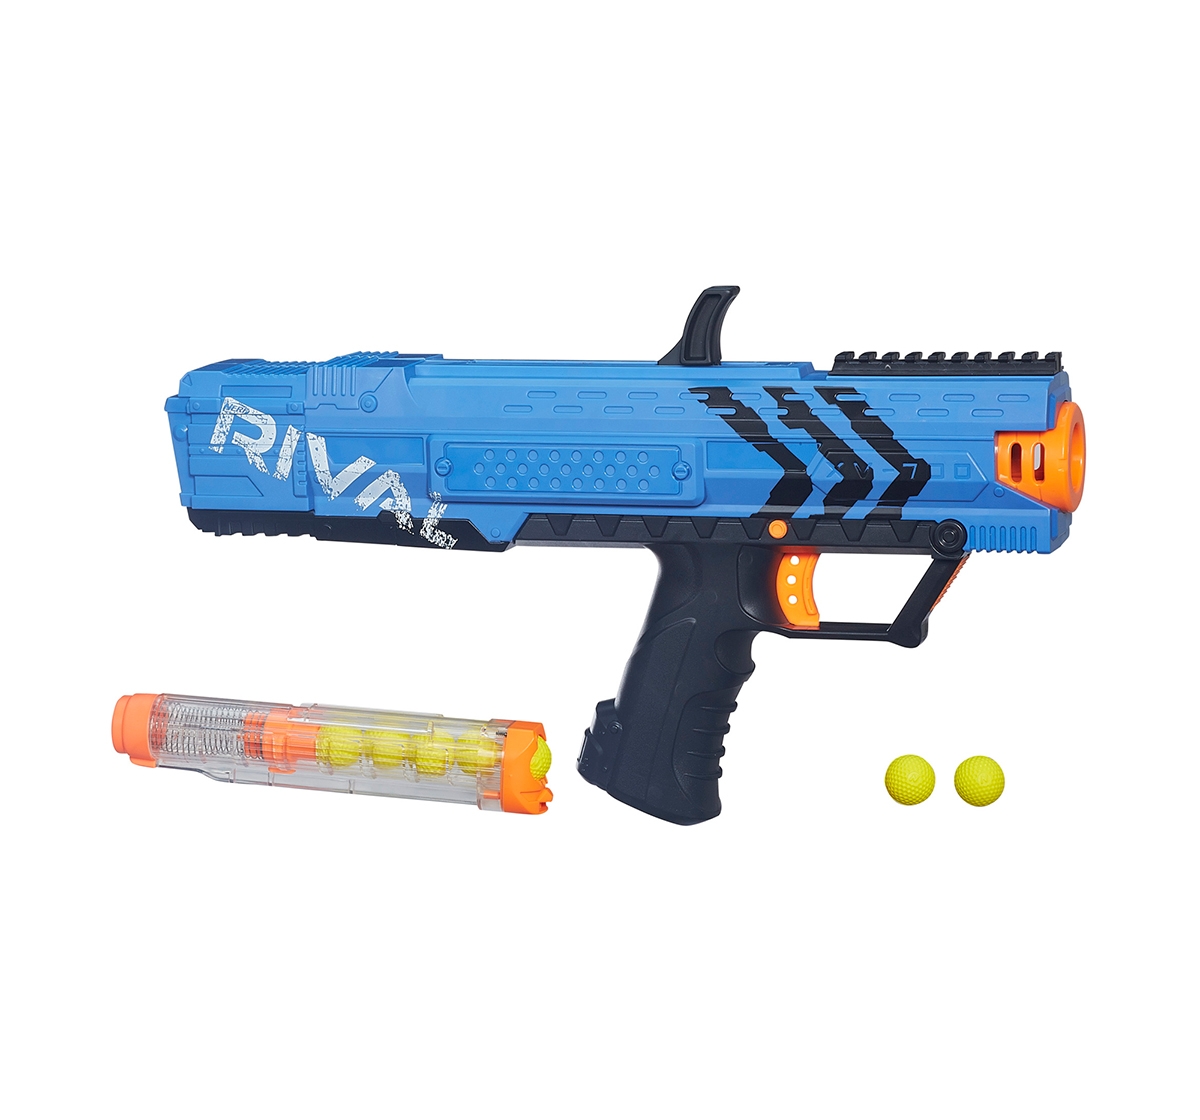 NERF RIVAL APOLLO XV 700 Toy Gun Assorted Blasters for Kids age 14Y+ 